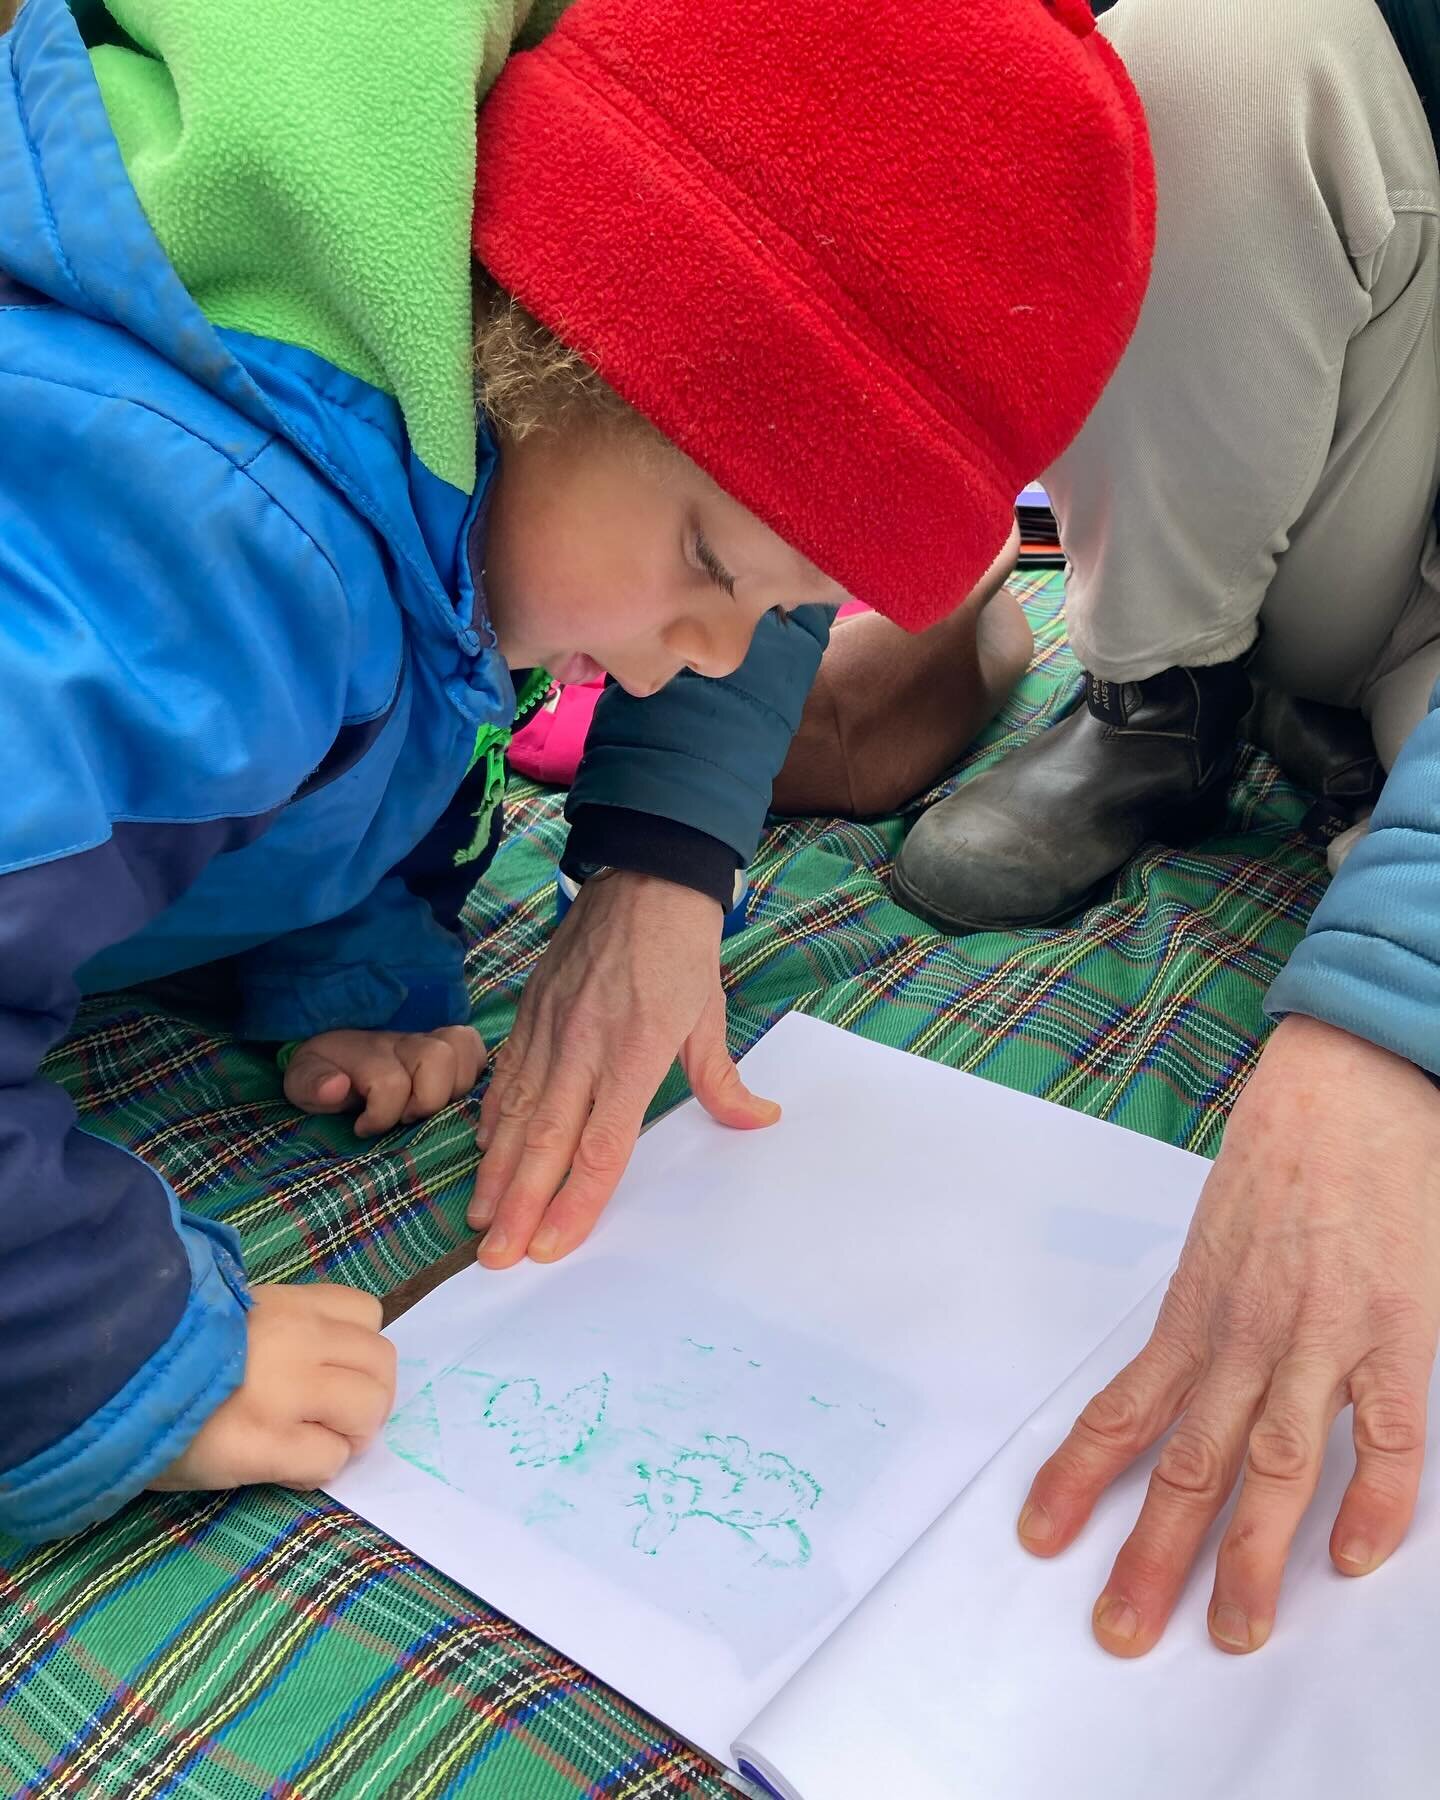 Nursery students are learning about animal tracks. They used templates to make rubbings of tracks in their nature journals. #outdooreducation #forestschooleducation #preschool #commonschool